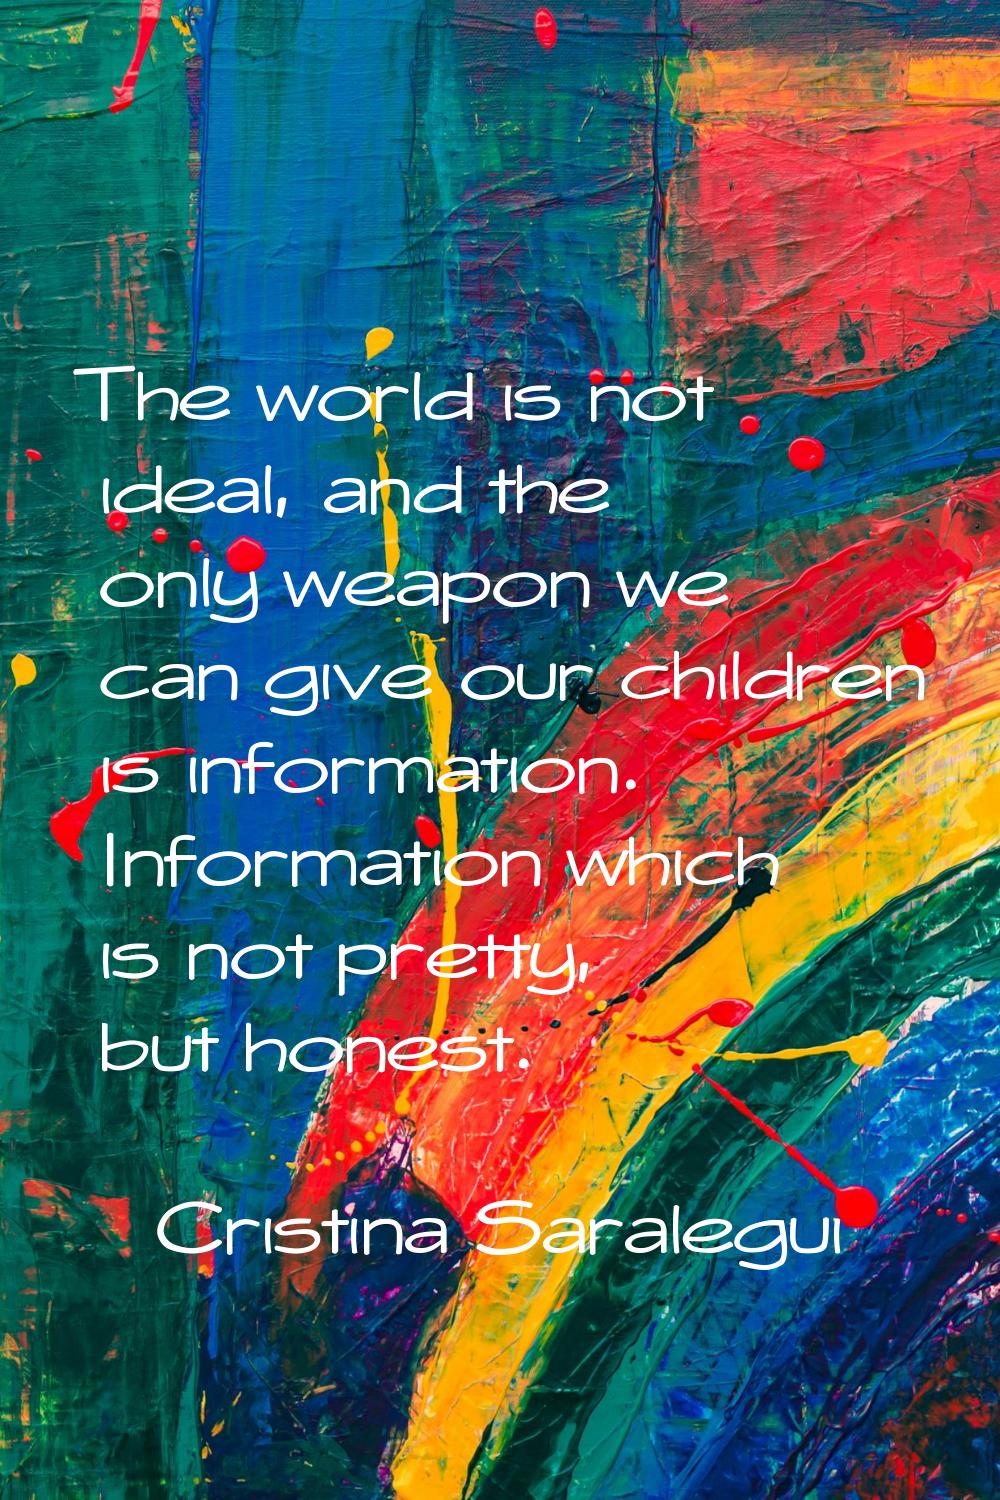 The world is not ideal, and the only weapon we can give our children is information. Information wh